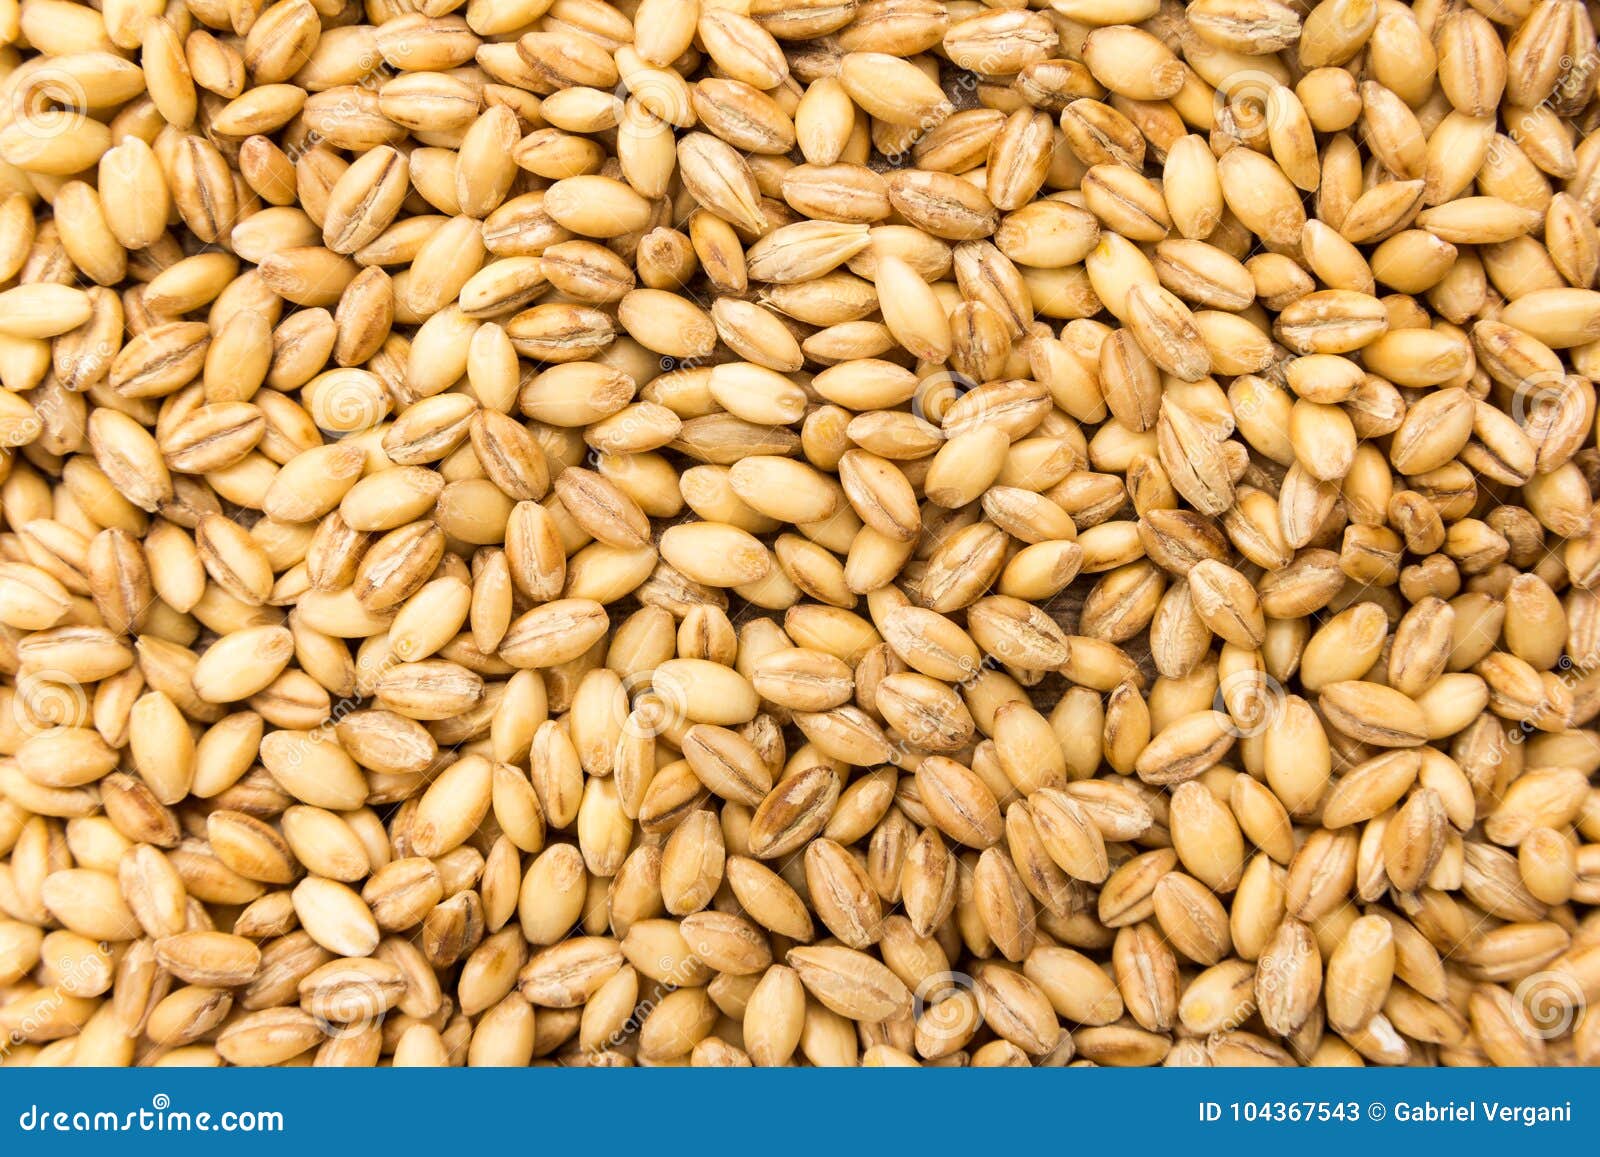 barley cereal grain. closeup of grains, background use.